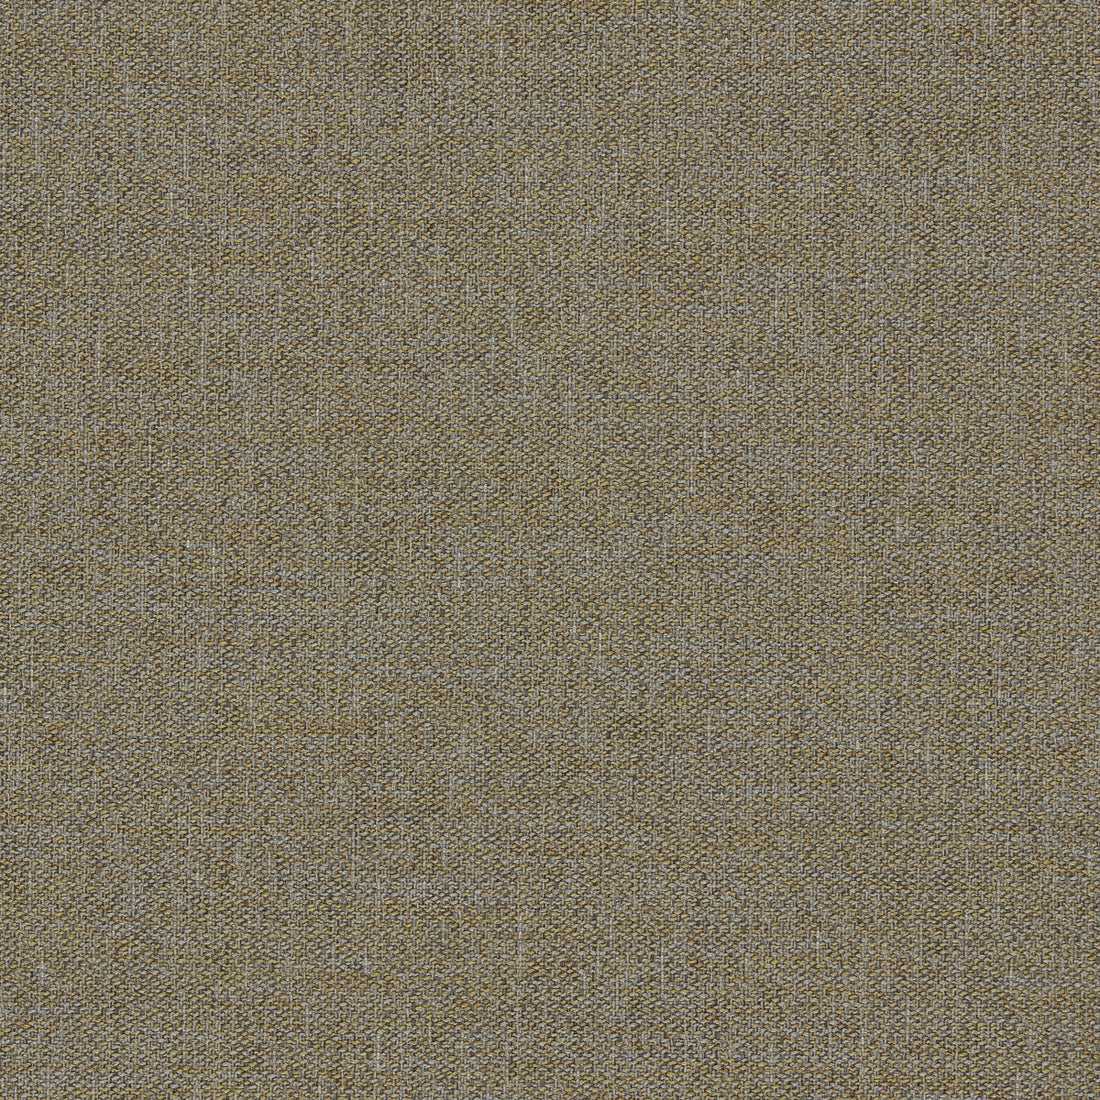 Llanara fabric in antique color - pattern F1422/01.CAC.0 - by Clarke And Clarke in the Clarke &amp; Clarke Purus collection